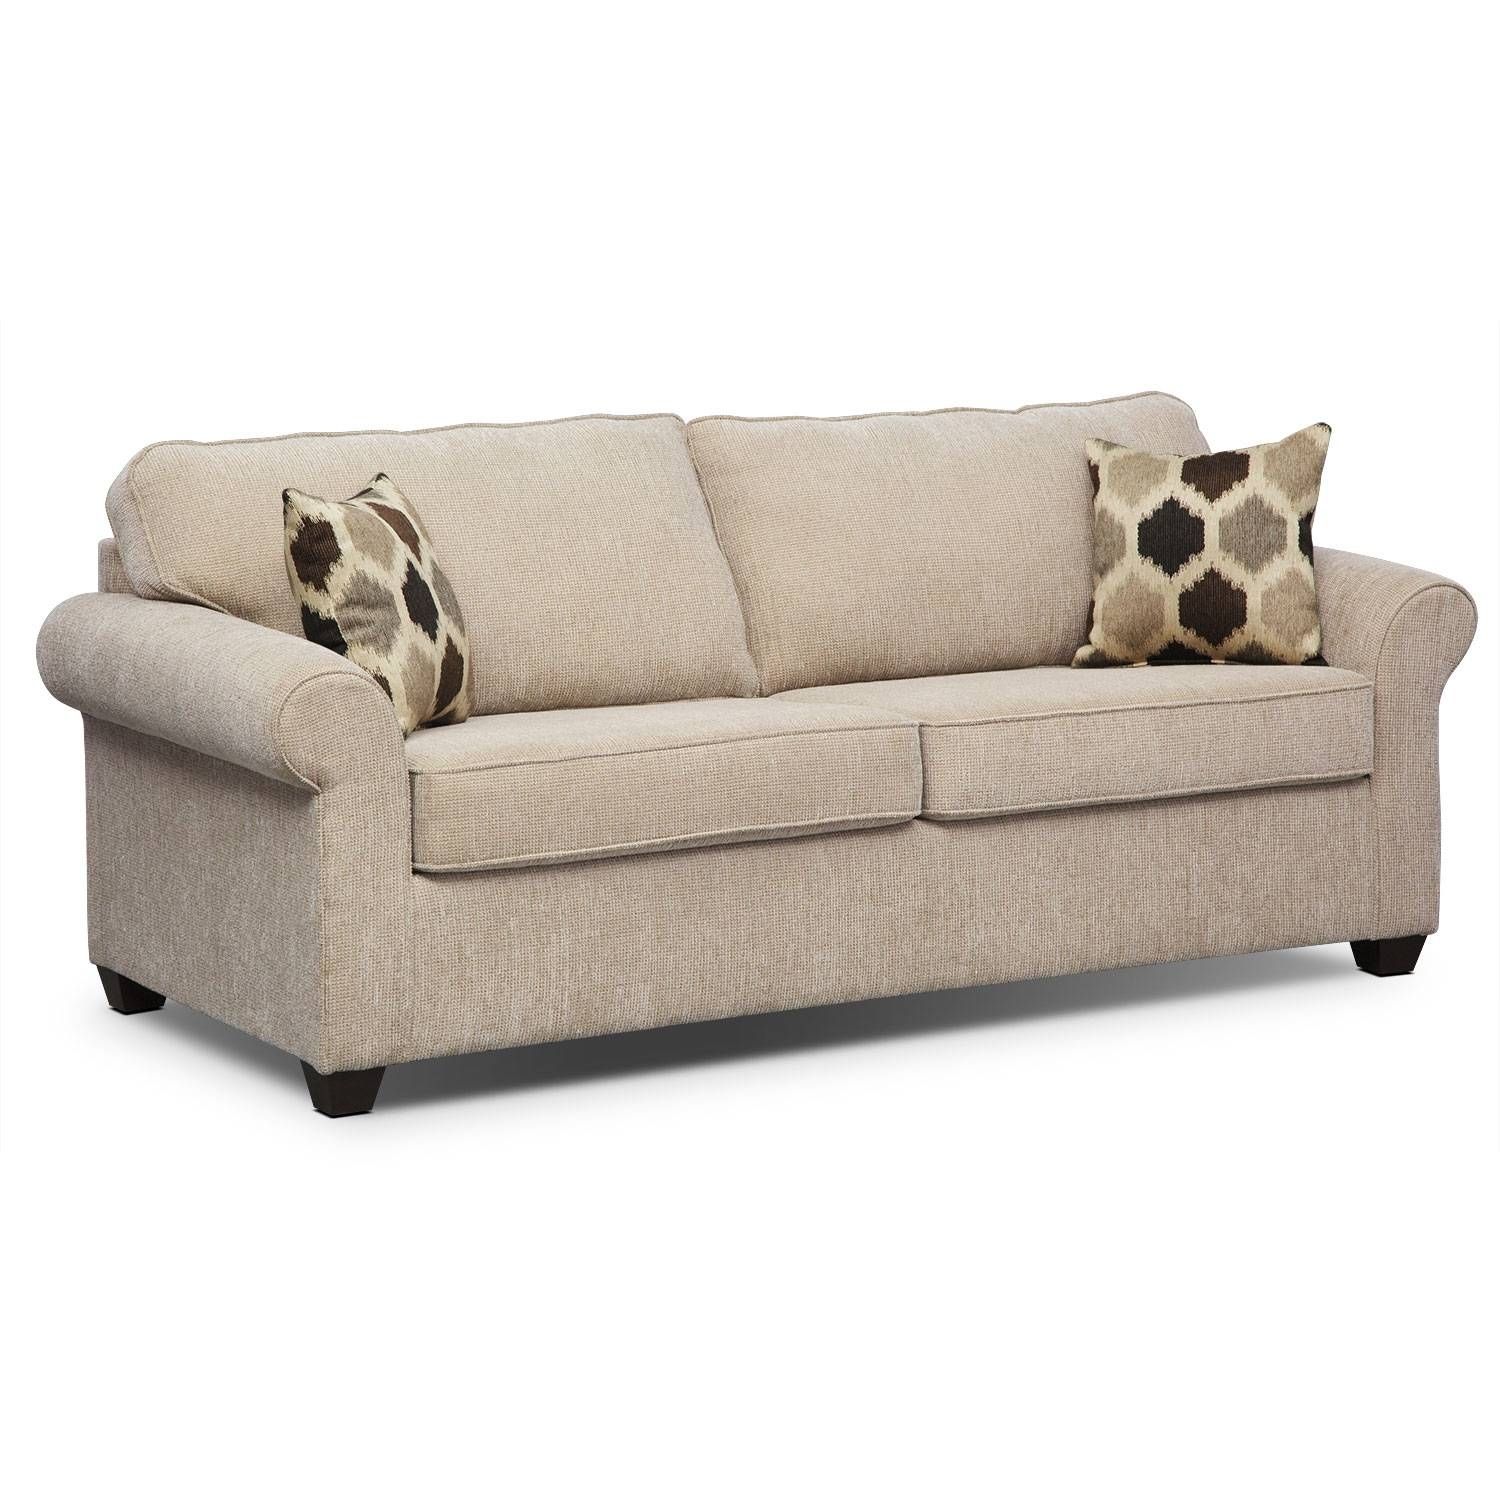 Attractive Sofa Sleepers Queen Latest Furniture Home Design Ideas With Simmons Sleeper Sofas (View 2 of 15)